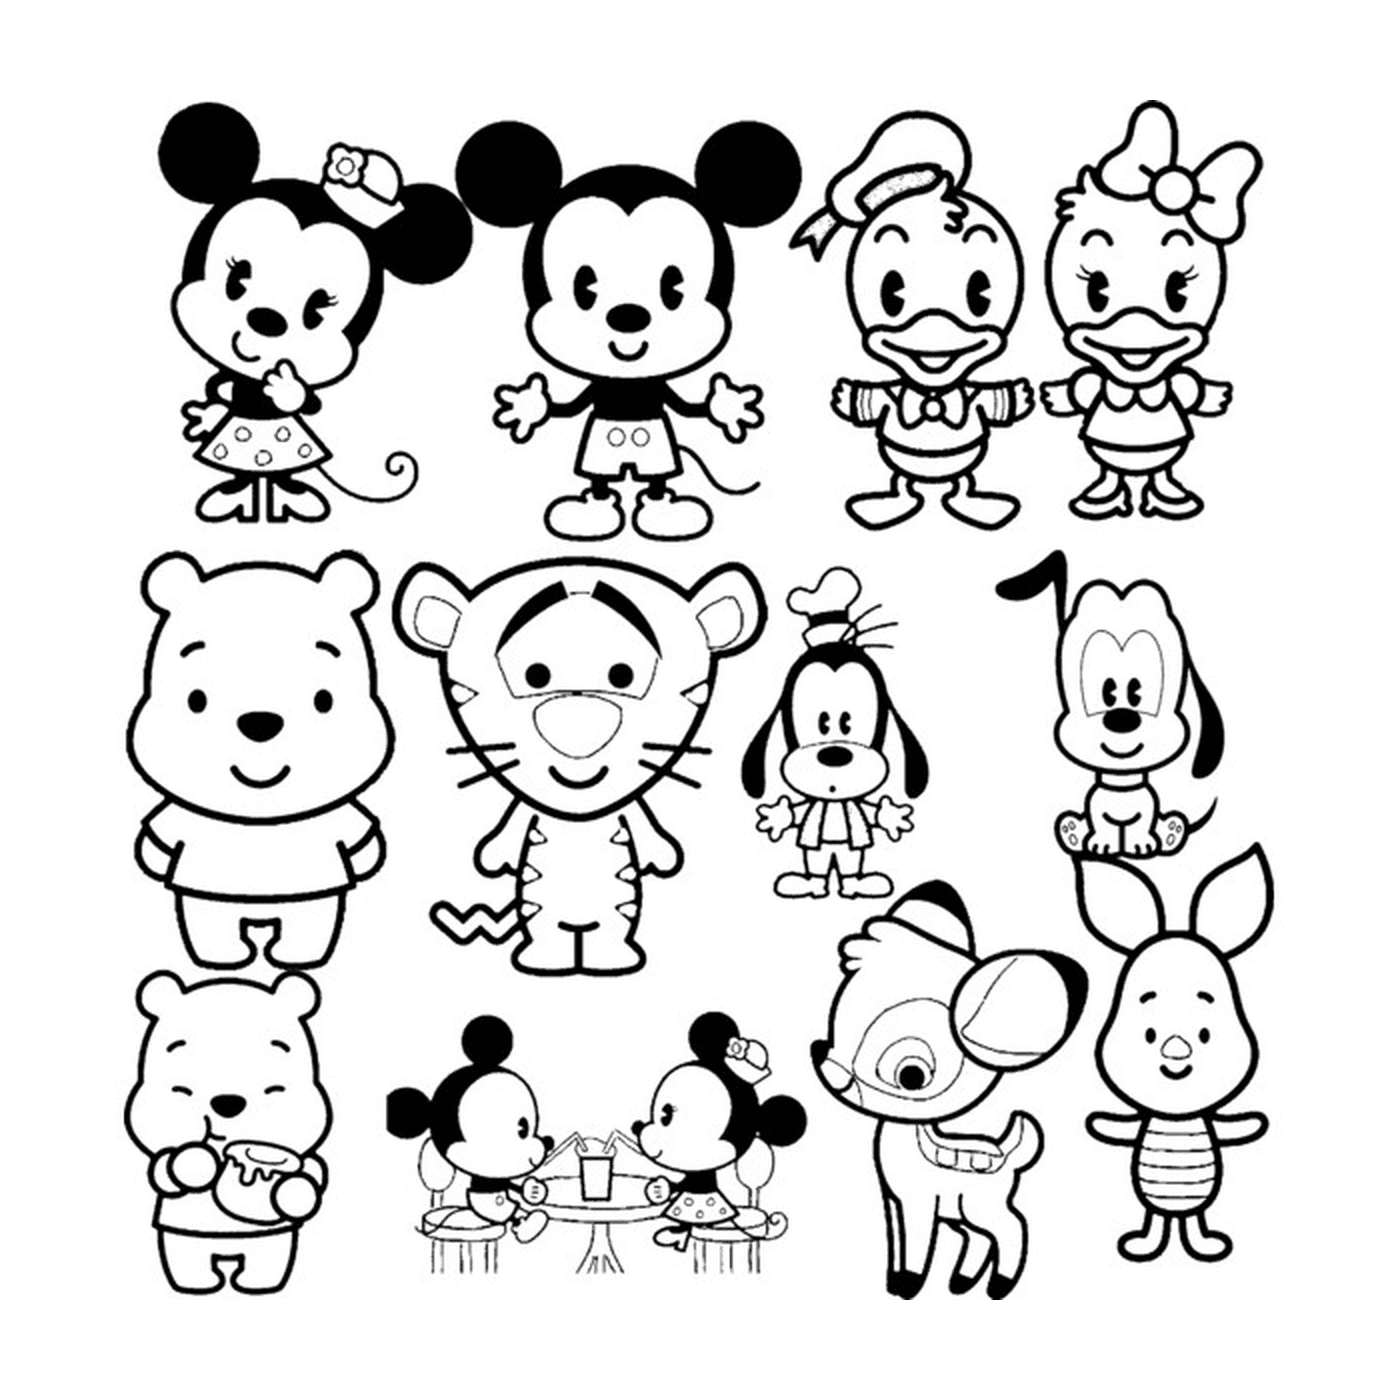   Mignons personnages Disney Cuties 